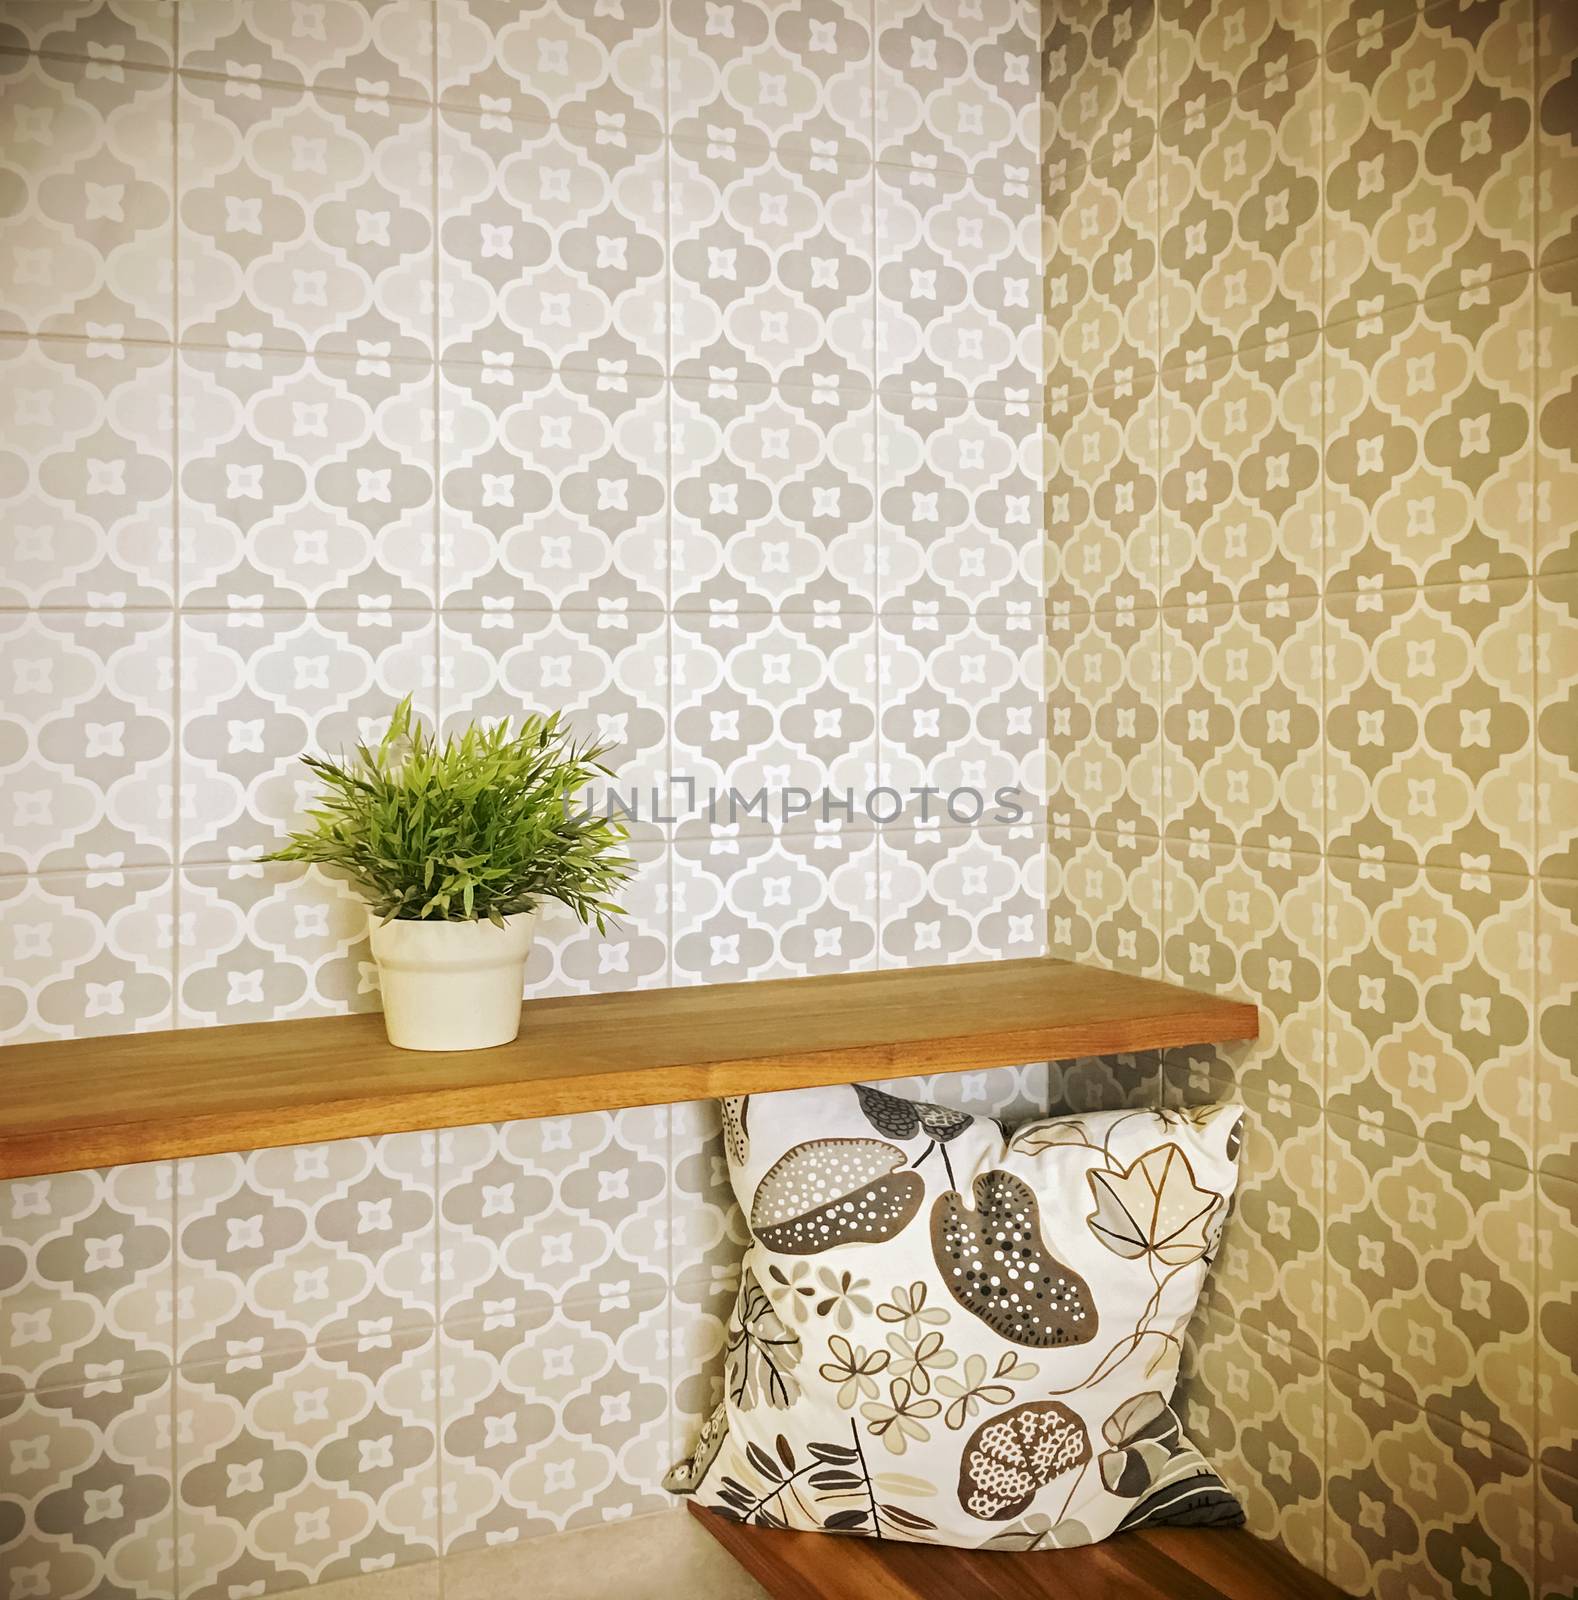 Detail of an entrance hall with green plant on a shelf and retro style wallpaper.